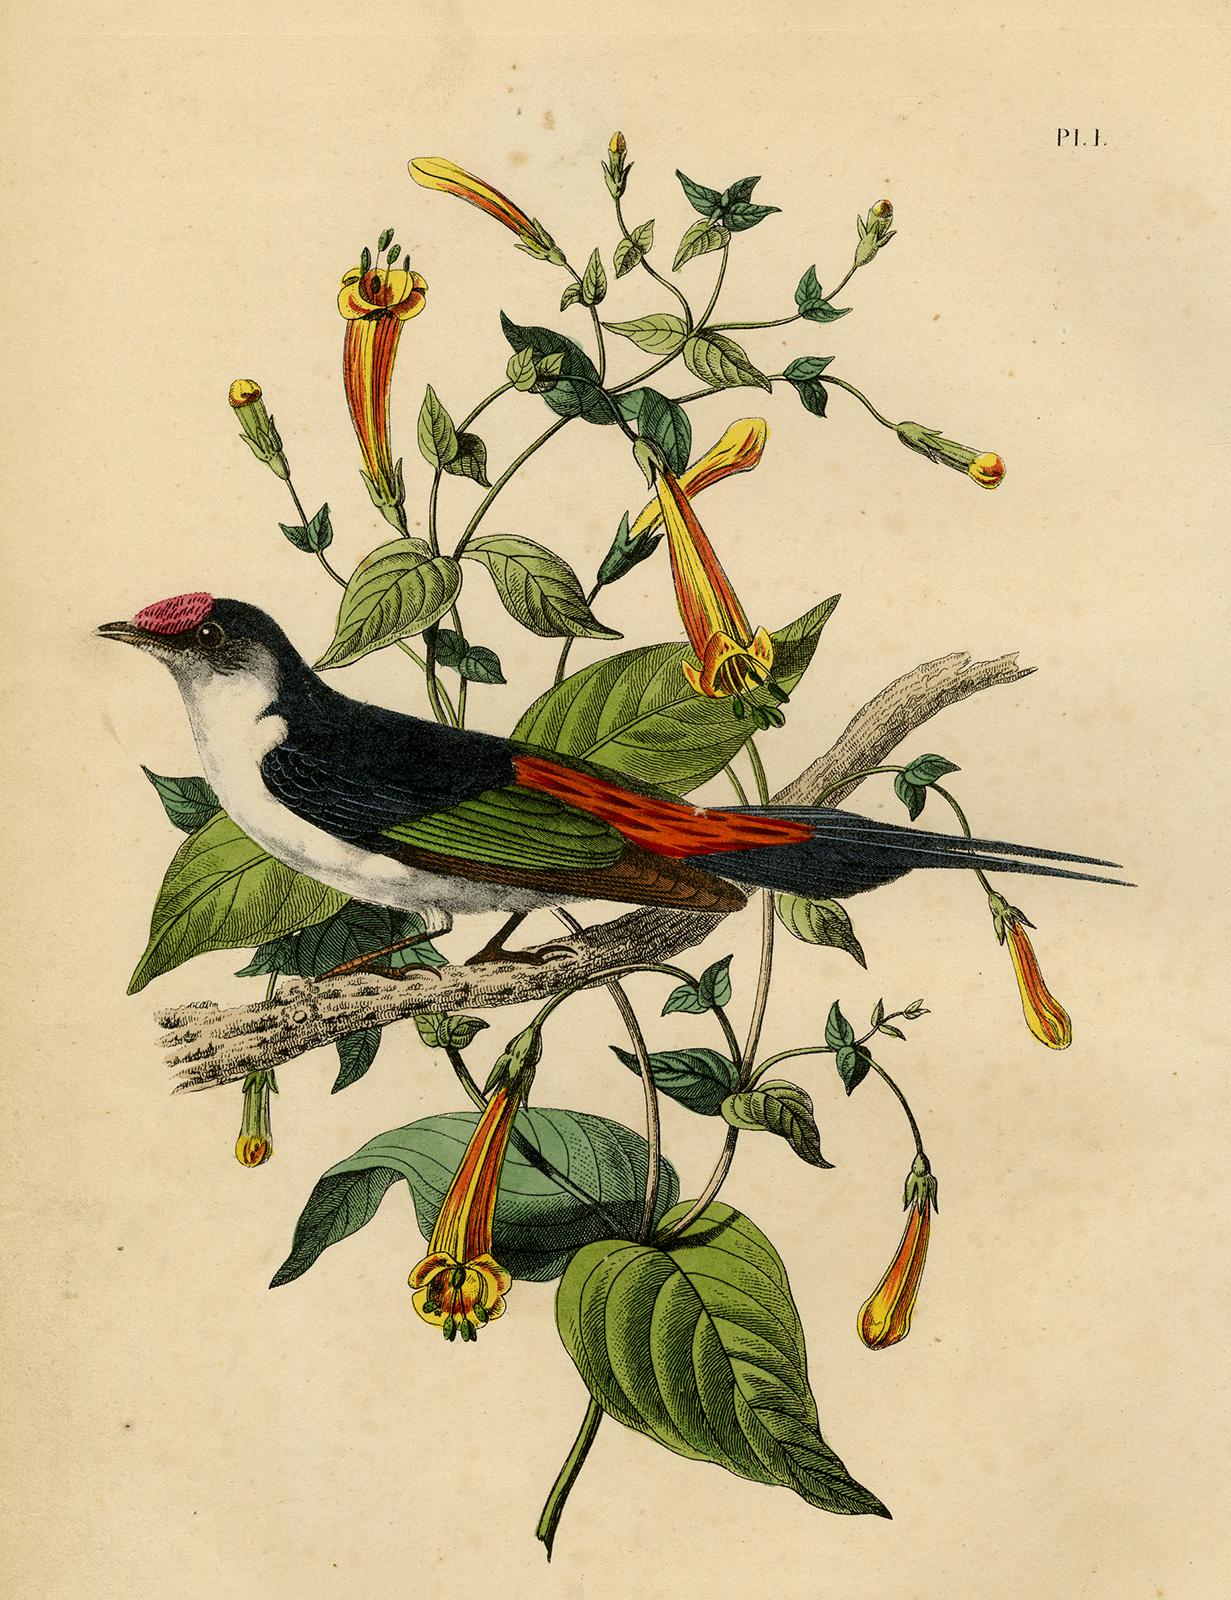 Jean-Emmanuel-Marie Le Maout Print - Antique print of a pin-tailed manakin by Le Maout - Engraving - 19th c.